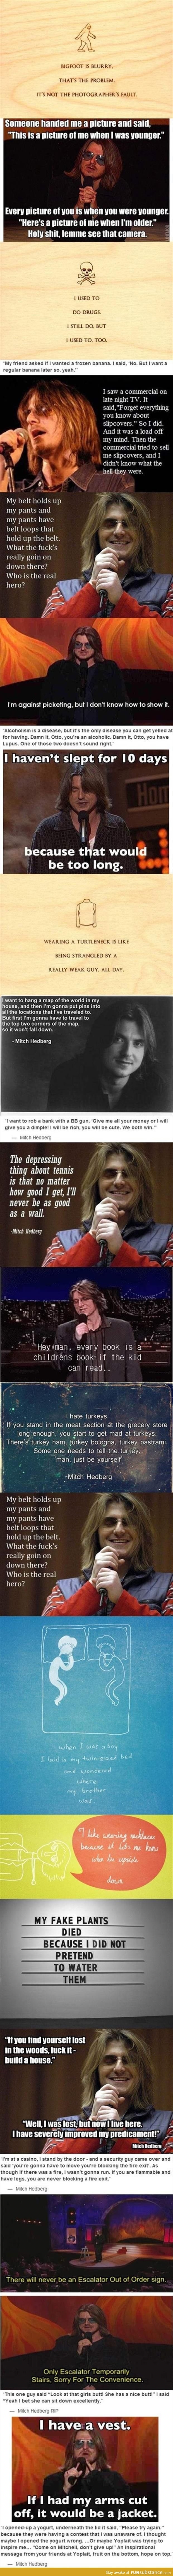 Mitch Hedberg quotes